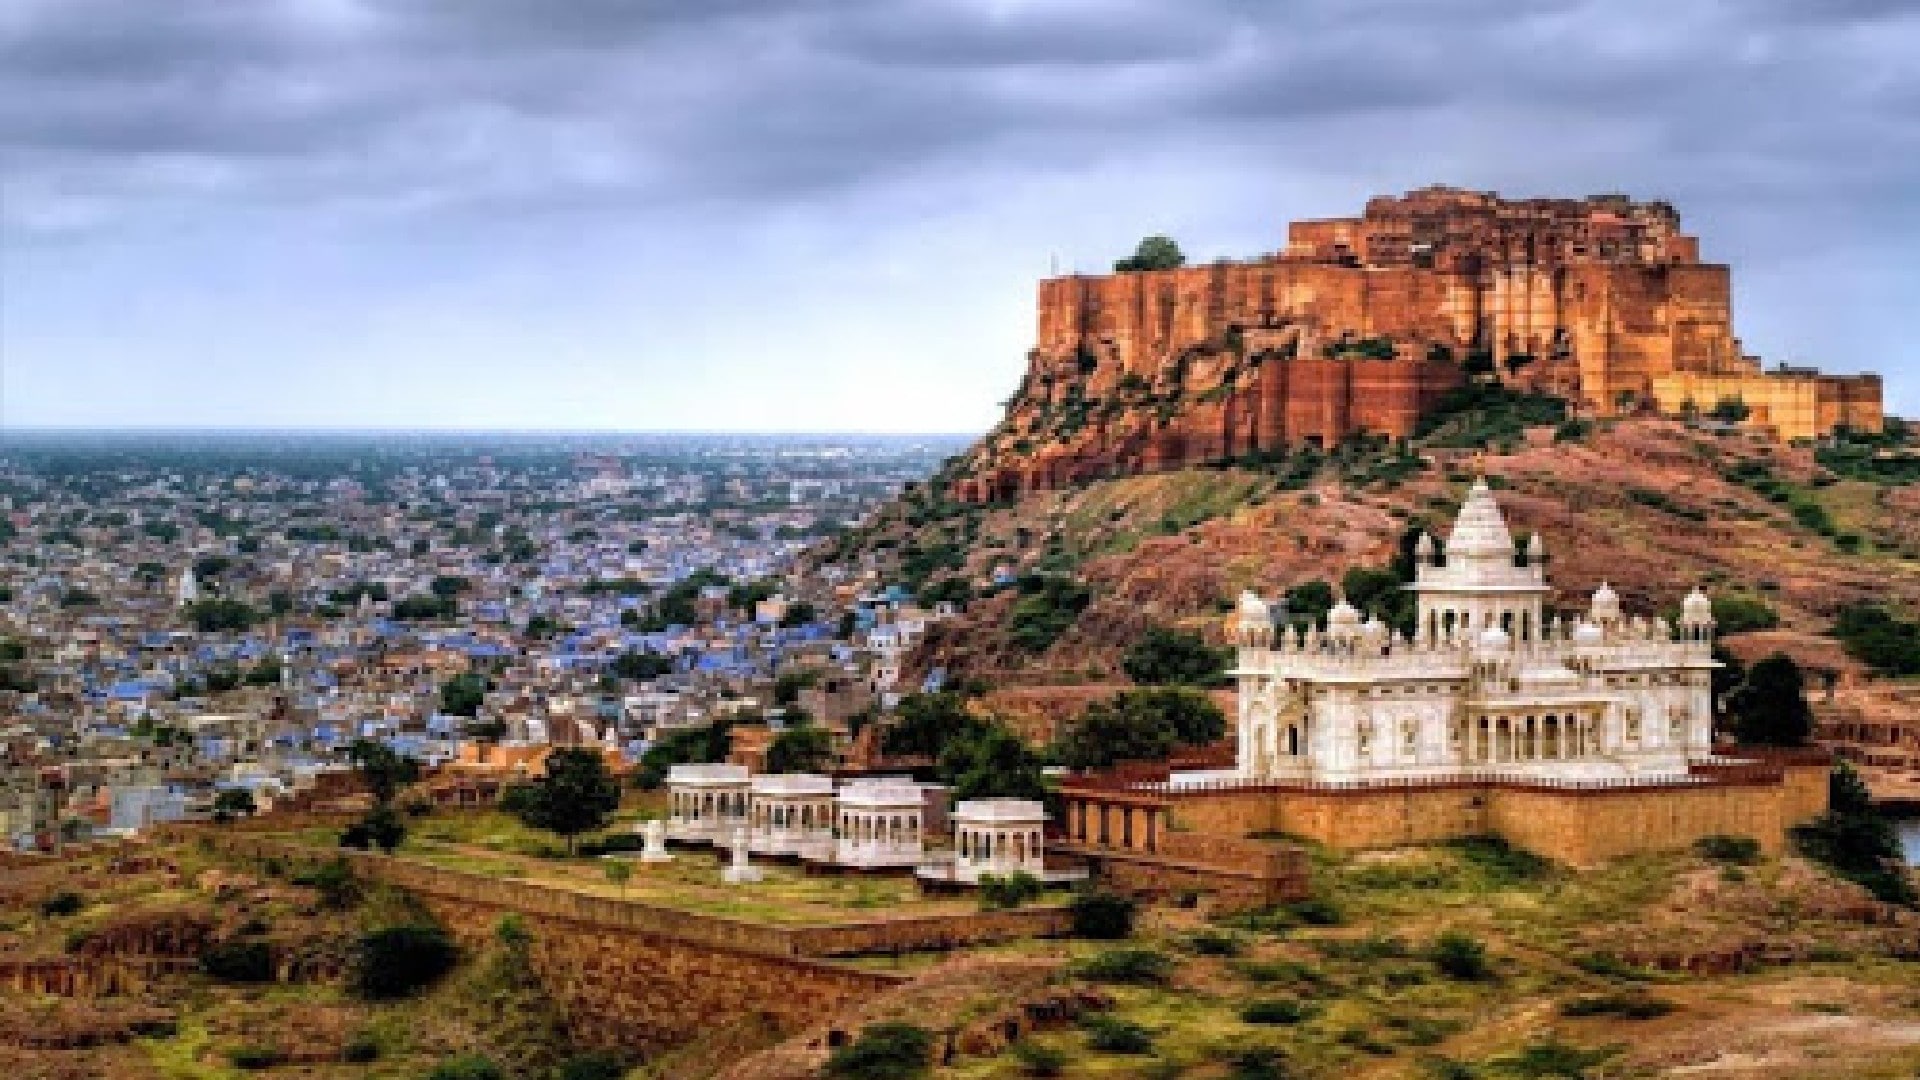 How Many UNESCO World Heritage Sites In Rajasthan Have You Been To?